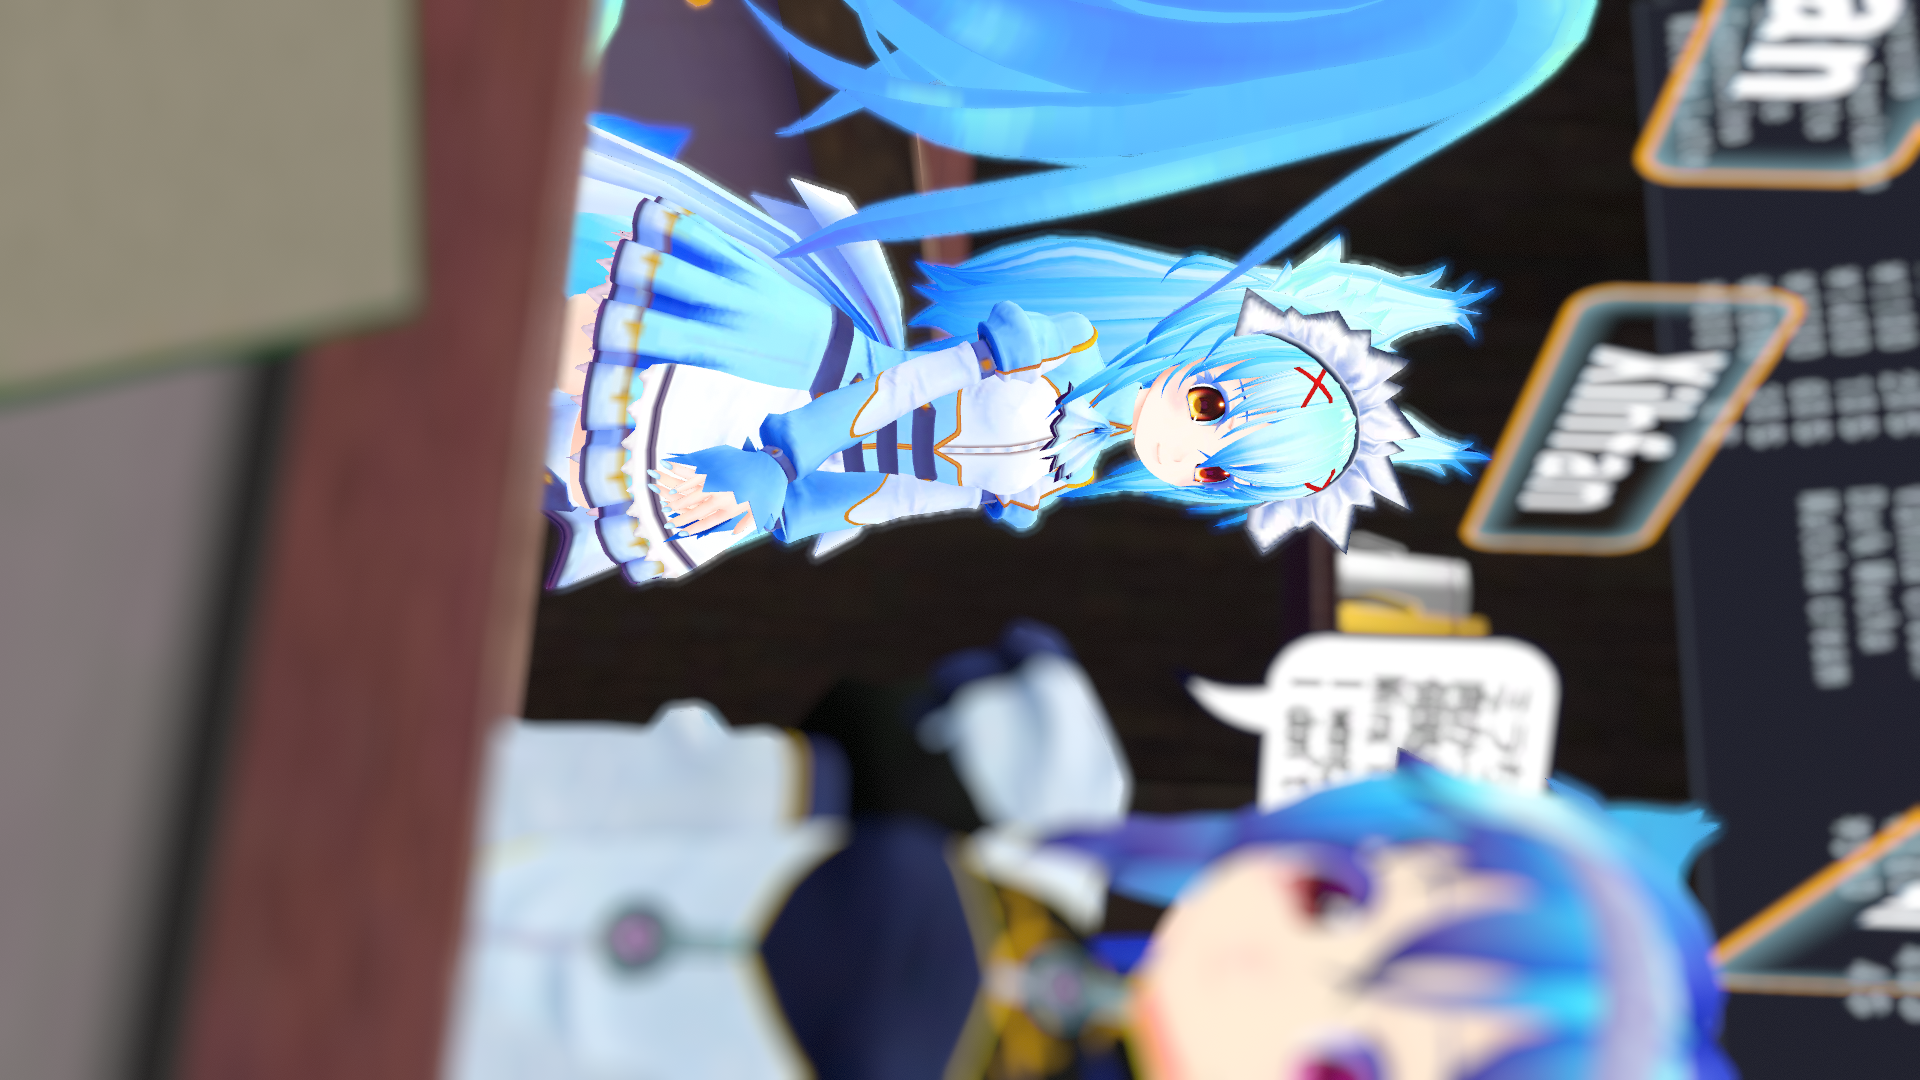 VRChat_1920x1080_2021-12-05_06-02-18.723.png